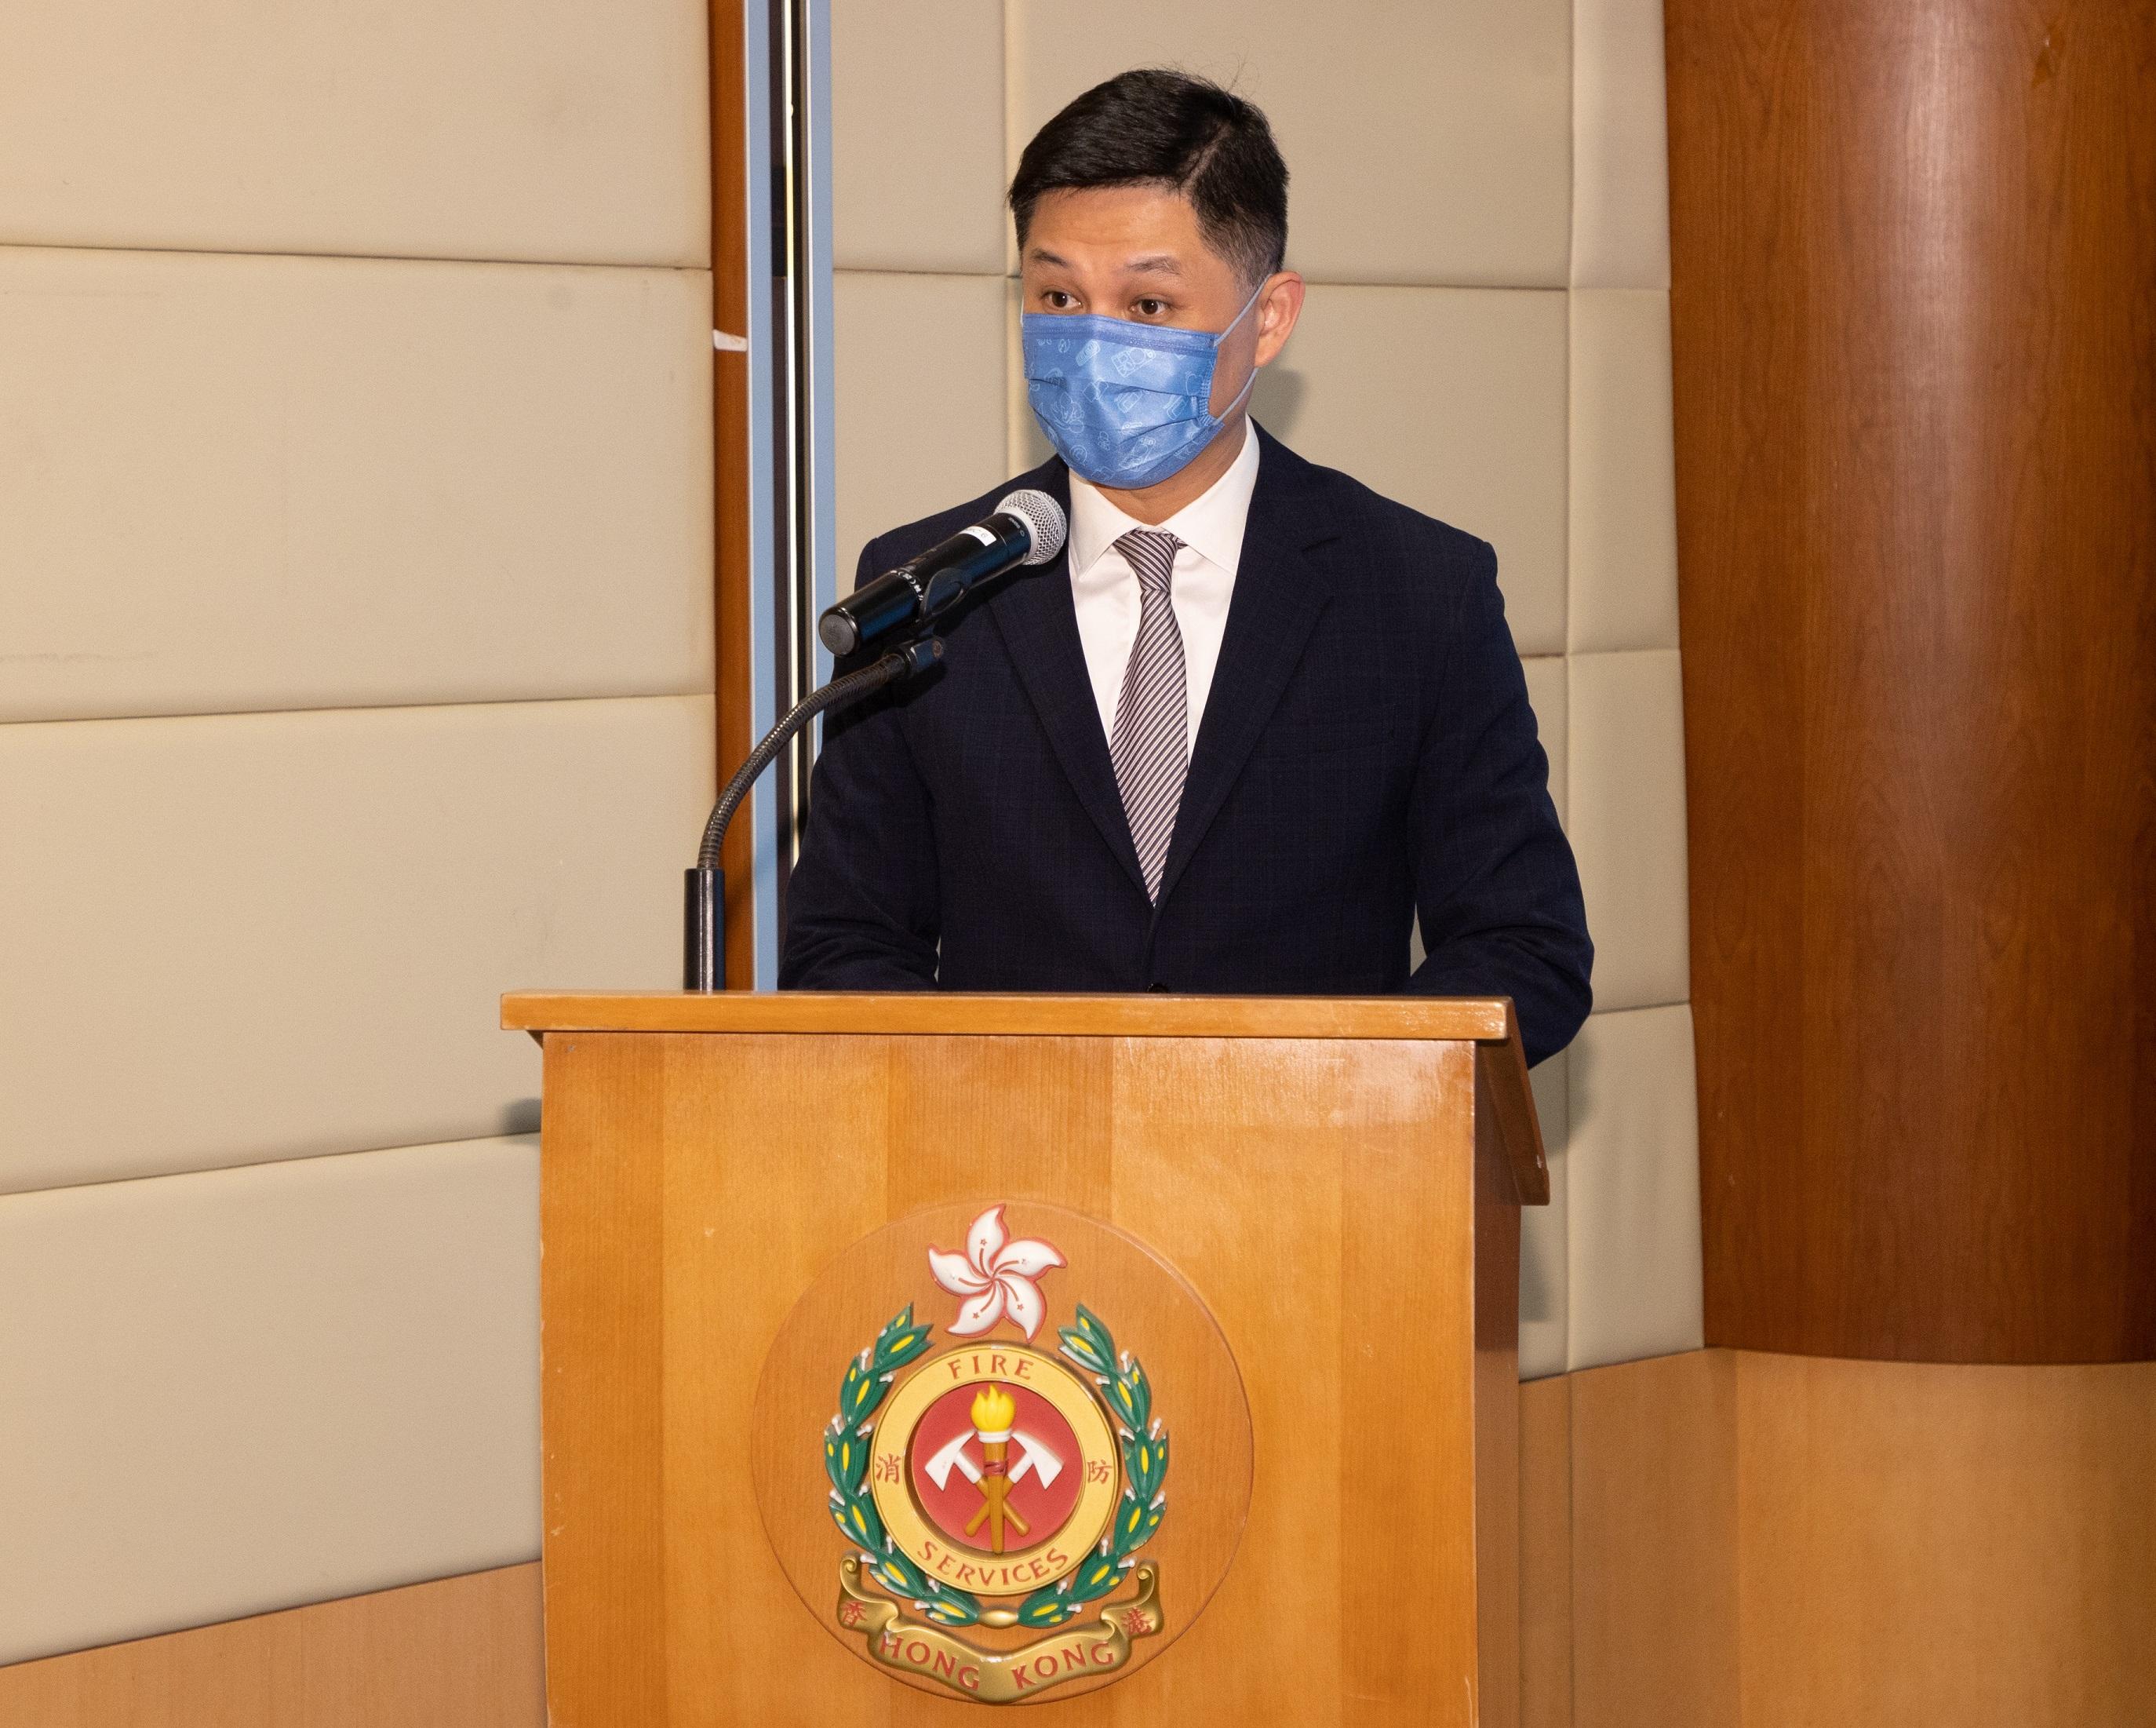 The Fire Services Department and the Hong Kong International Aviation Academy signed a Memorandum of Understanding today (September 30). Photo shows the Director of Fire Services, Mr Andy Yeung, speaking at the signing ceremony.

